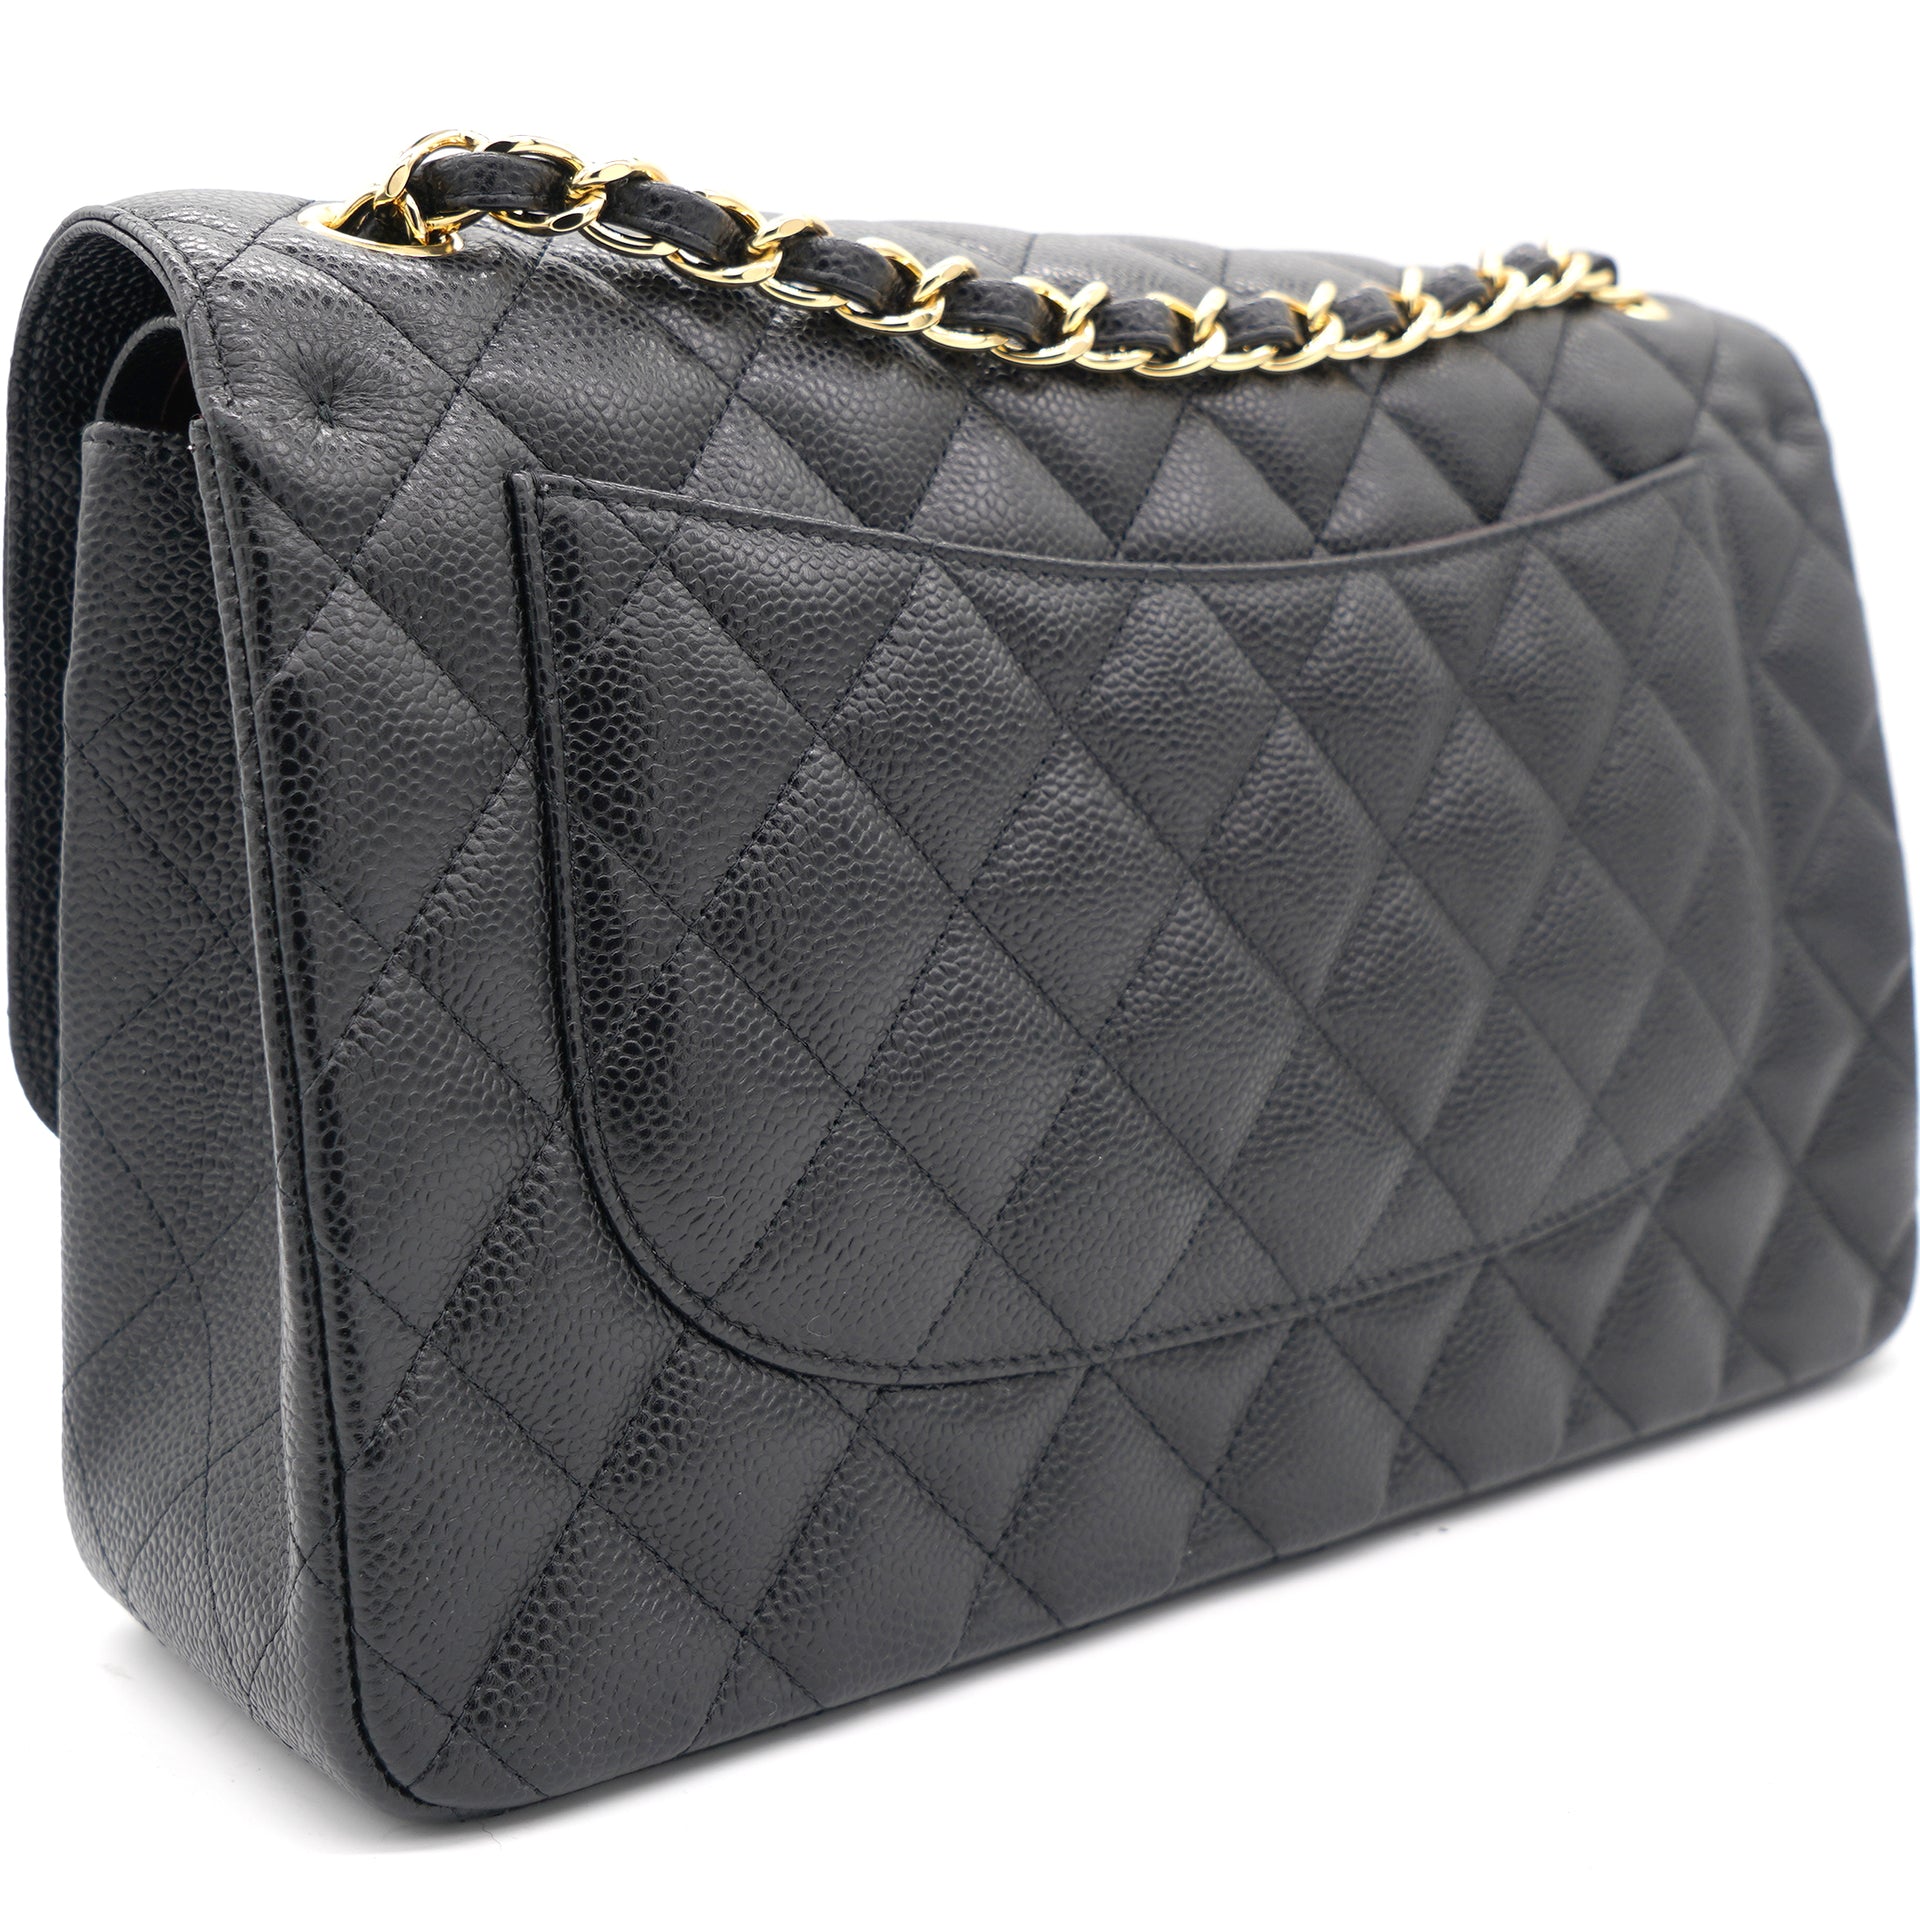 AUTHENTIC Chanel Black Jumbo Caviar Quilted HandBag for Sale